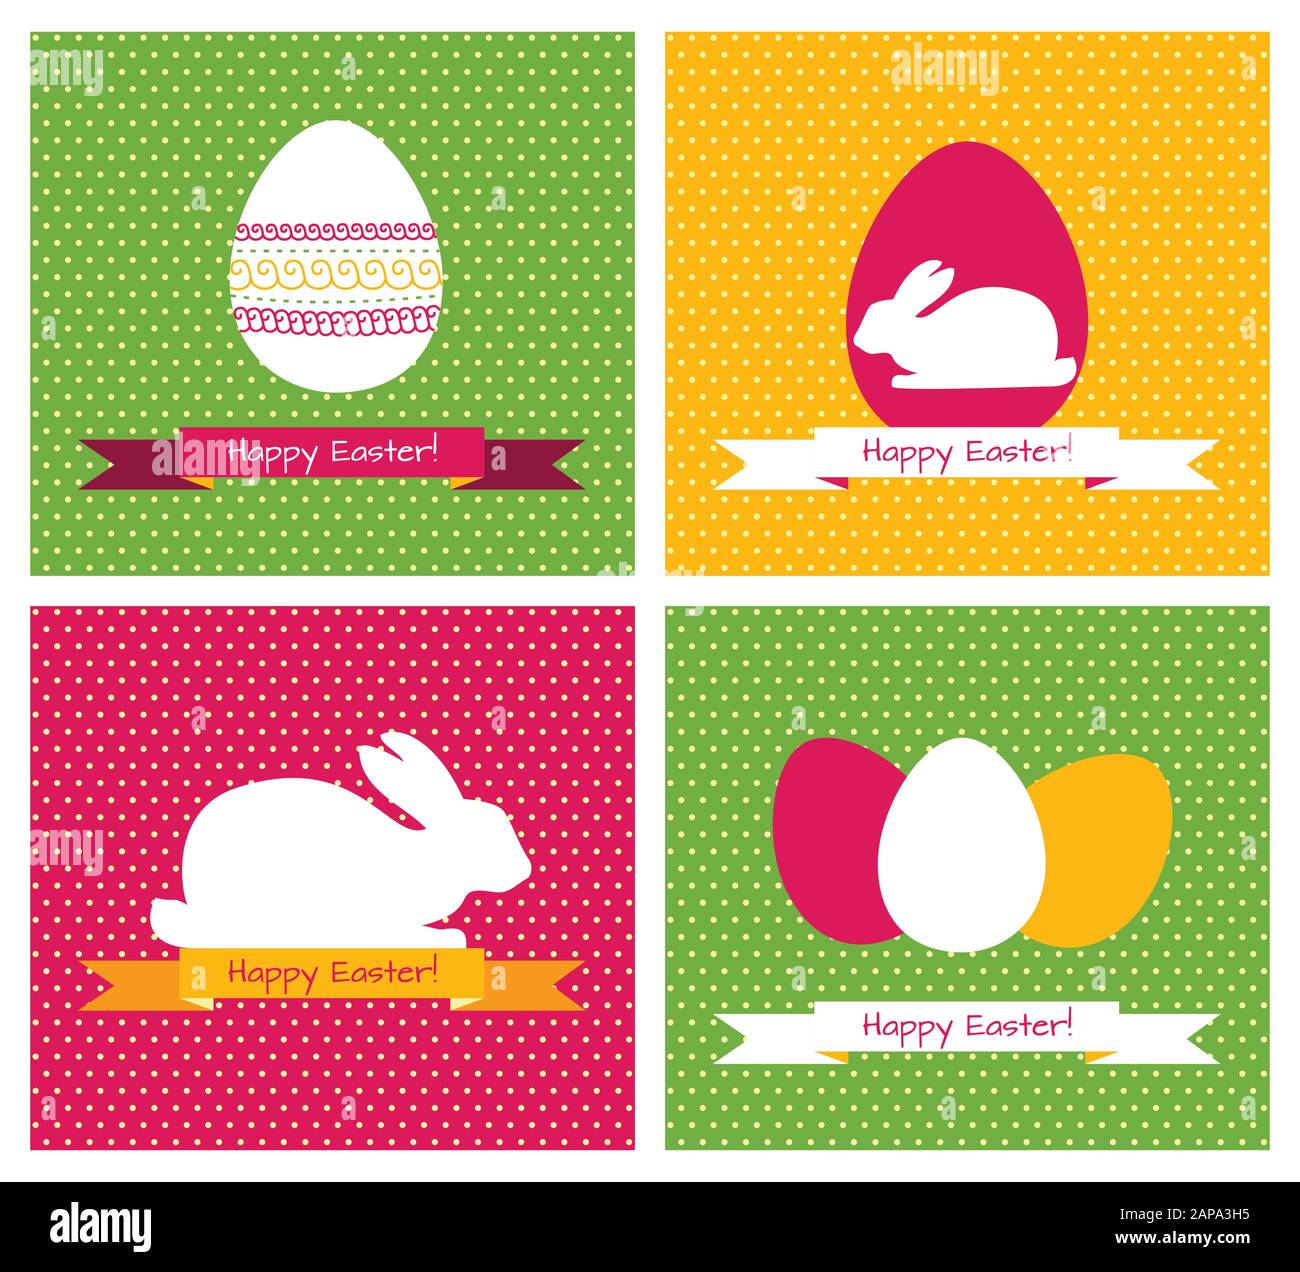 Easter greeting cards Stock Vector